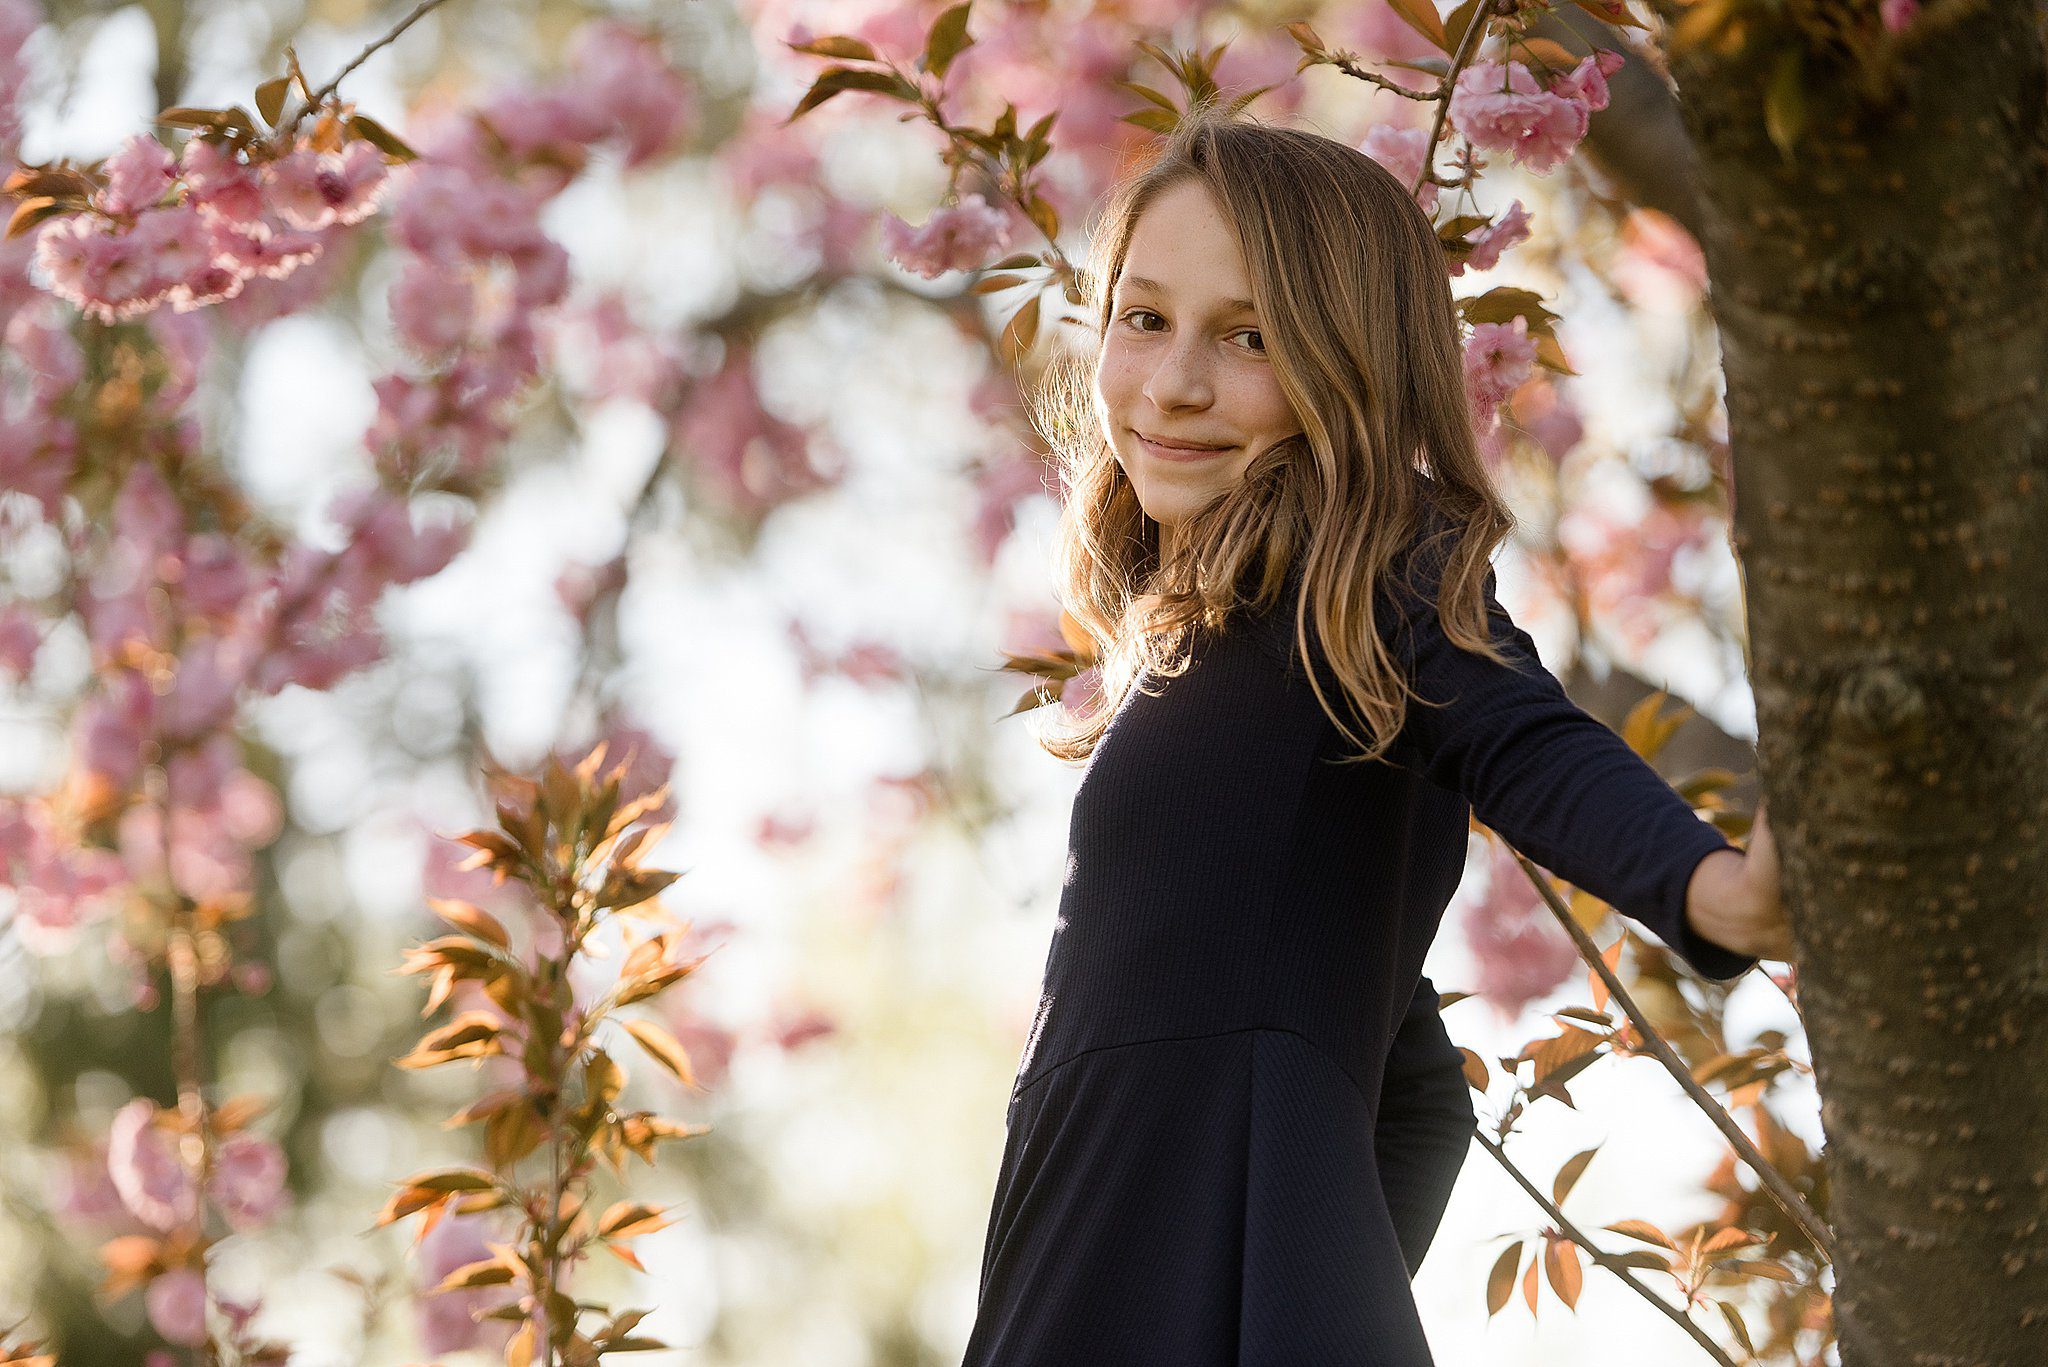 A young girl in a blue dress stands in a flowering tree after meeting with nannies in connecticut